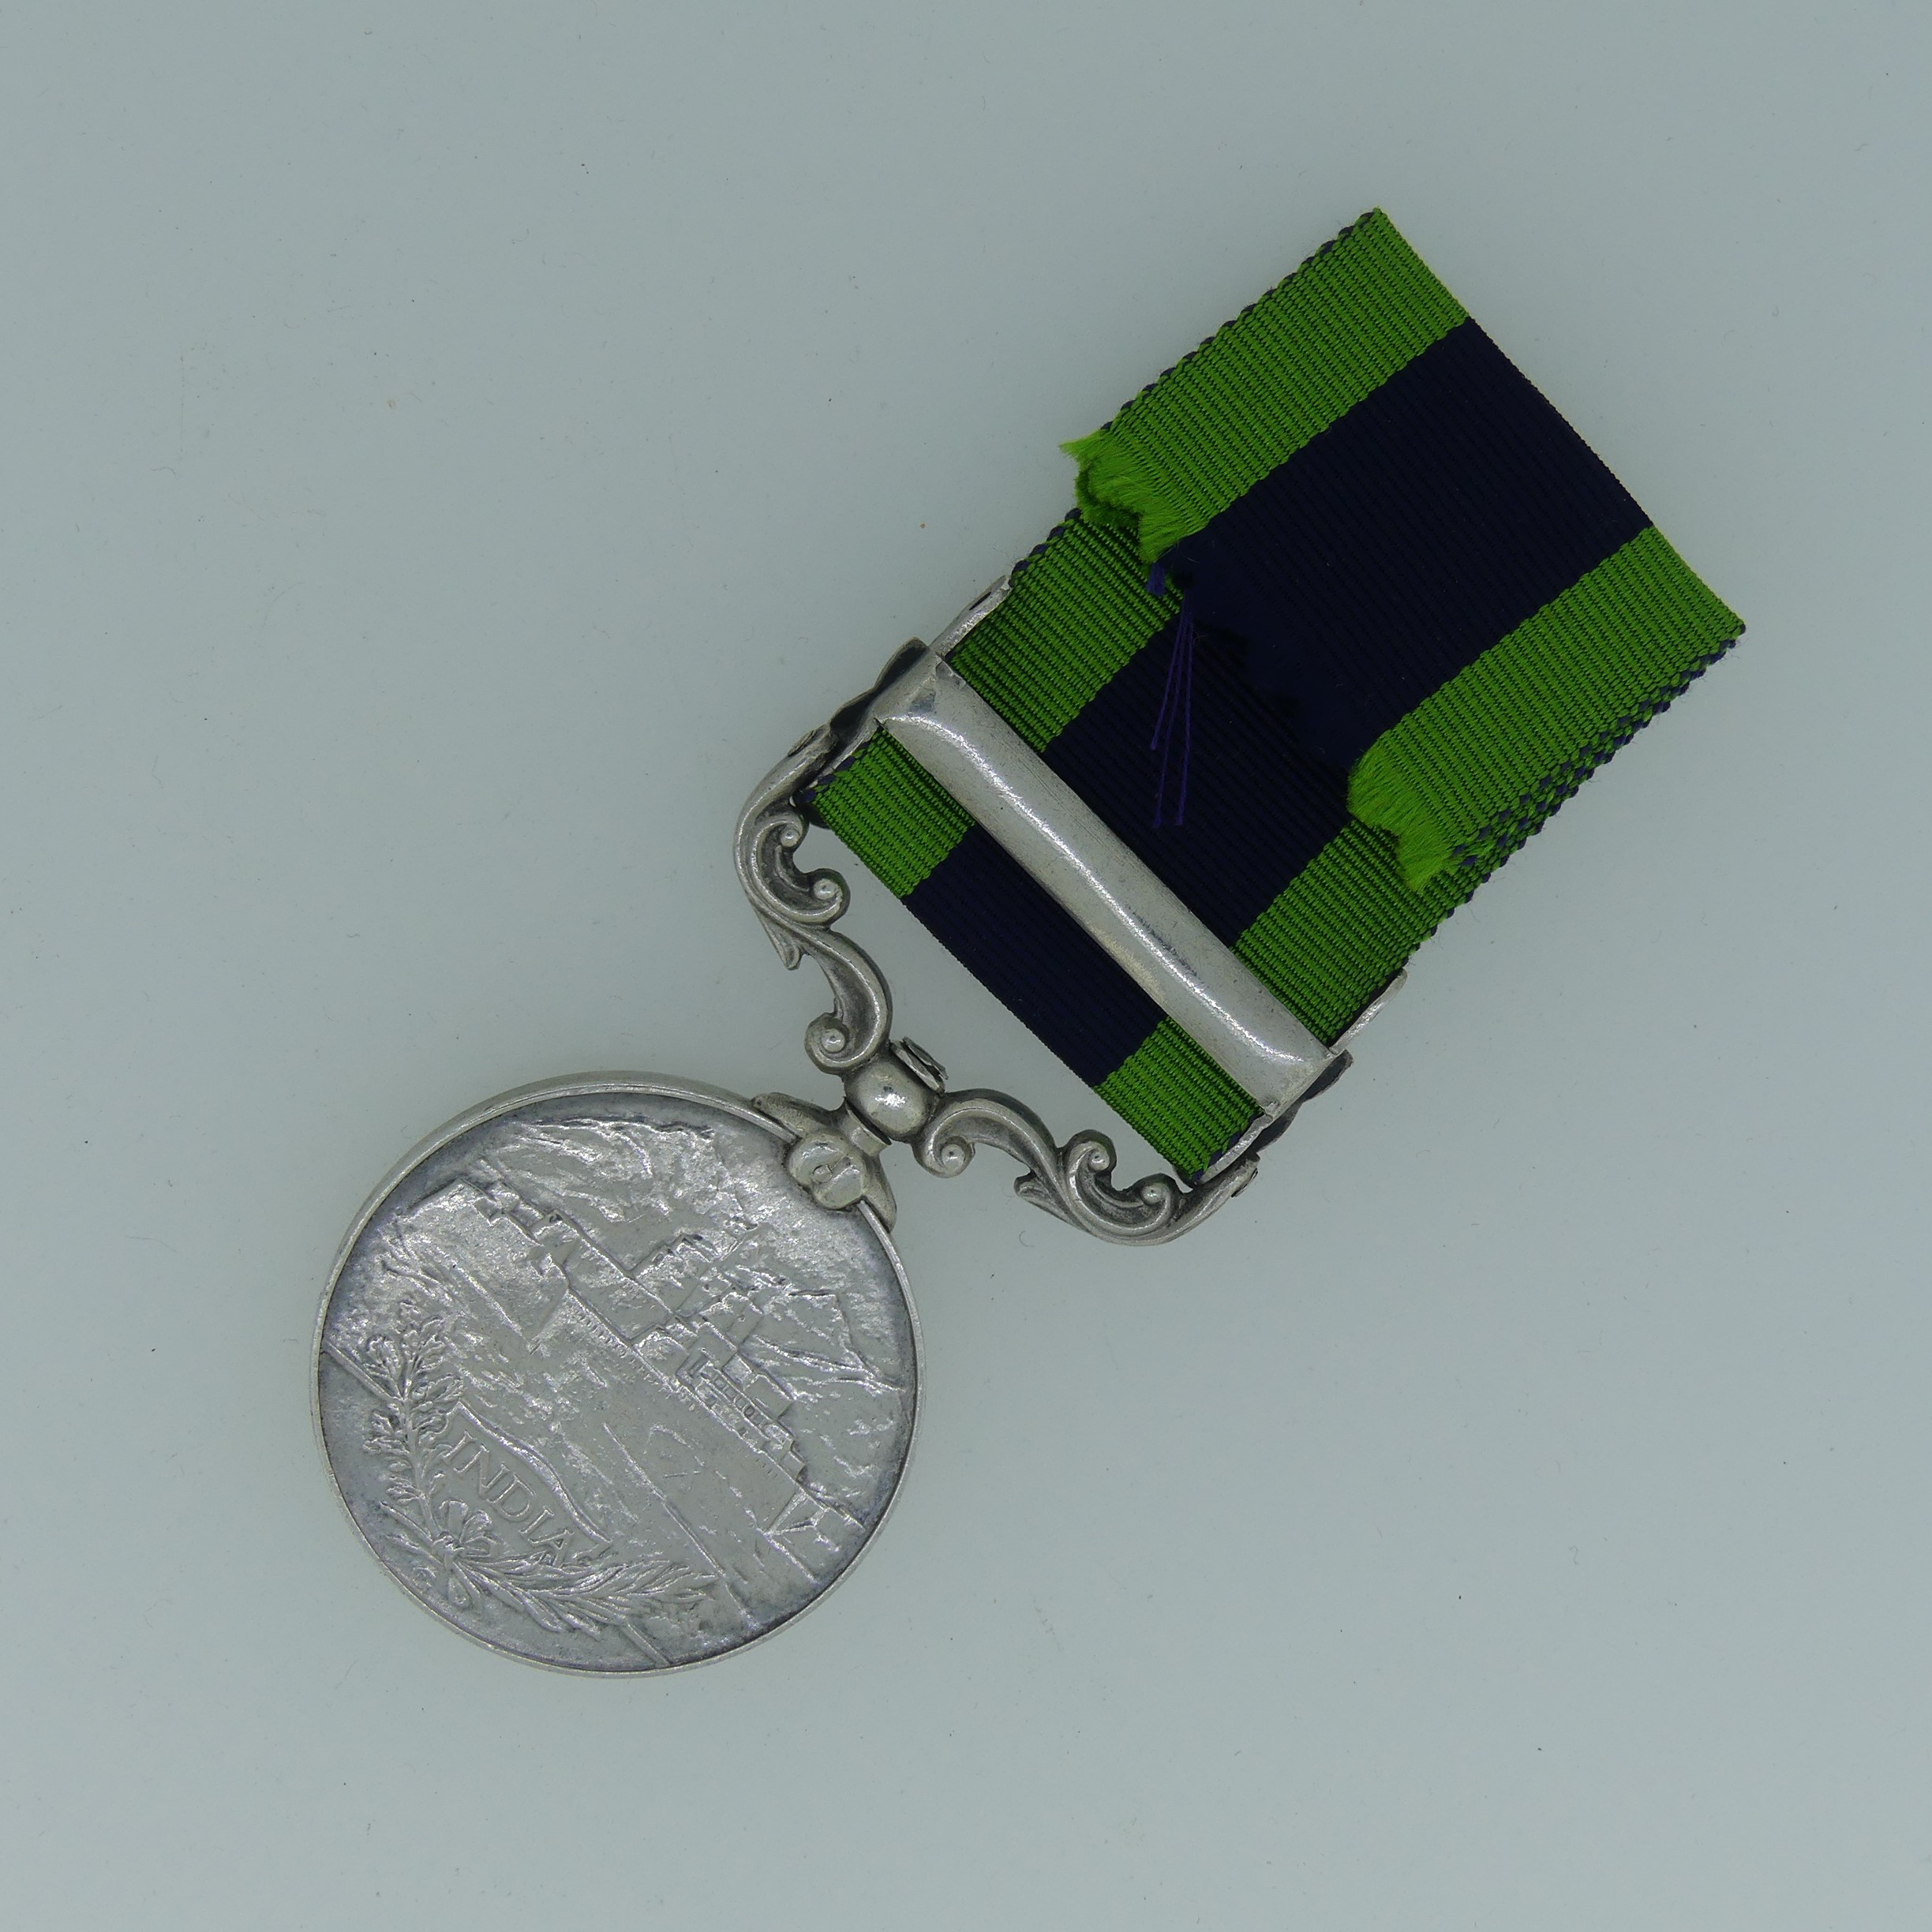 India General Service Medal, 1909, One clasp (Afghanistan NWF 1919) 916 Nk Abdul Qadir 1-107 Pnrs. - Image 3 of 5